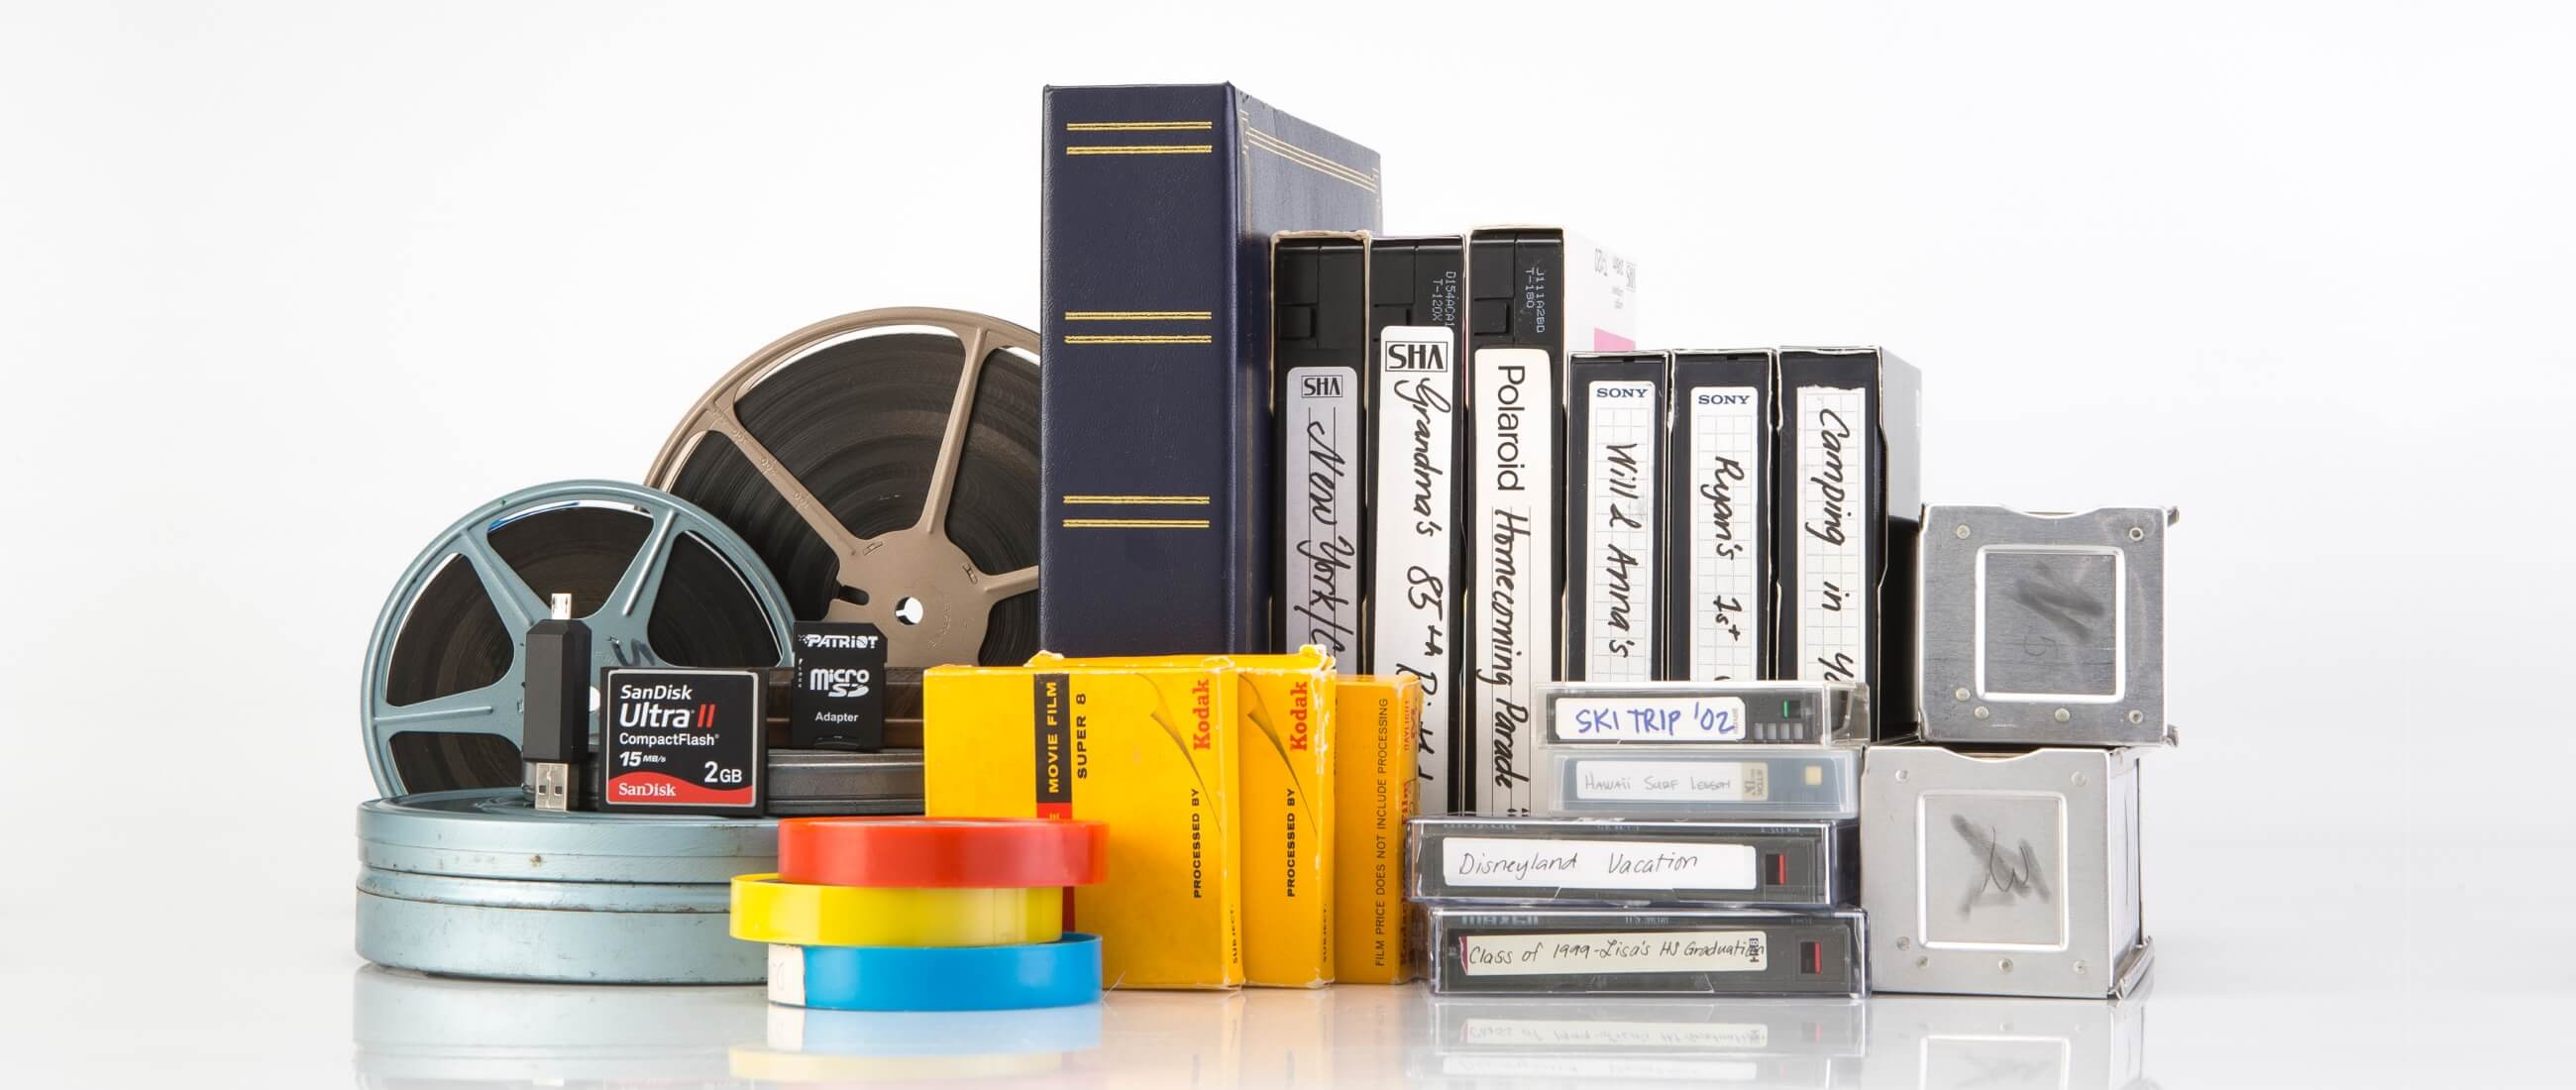 Home Movie Film Transfer - Videotapes, Film Reels, Slides and Photos  Transferred to Digital